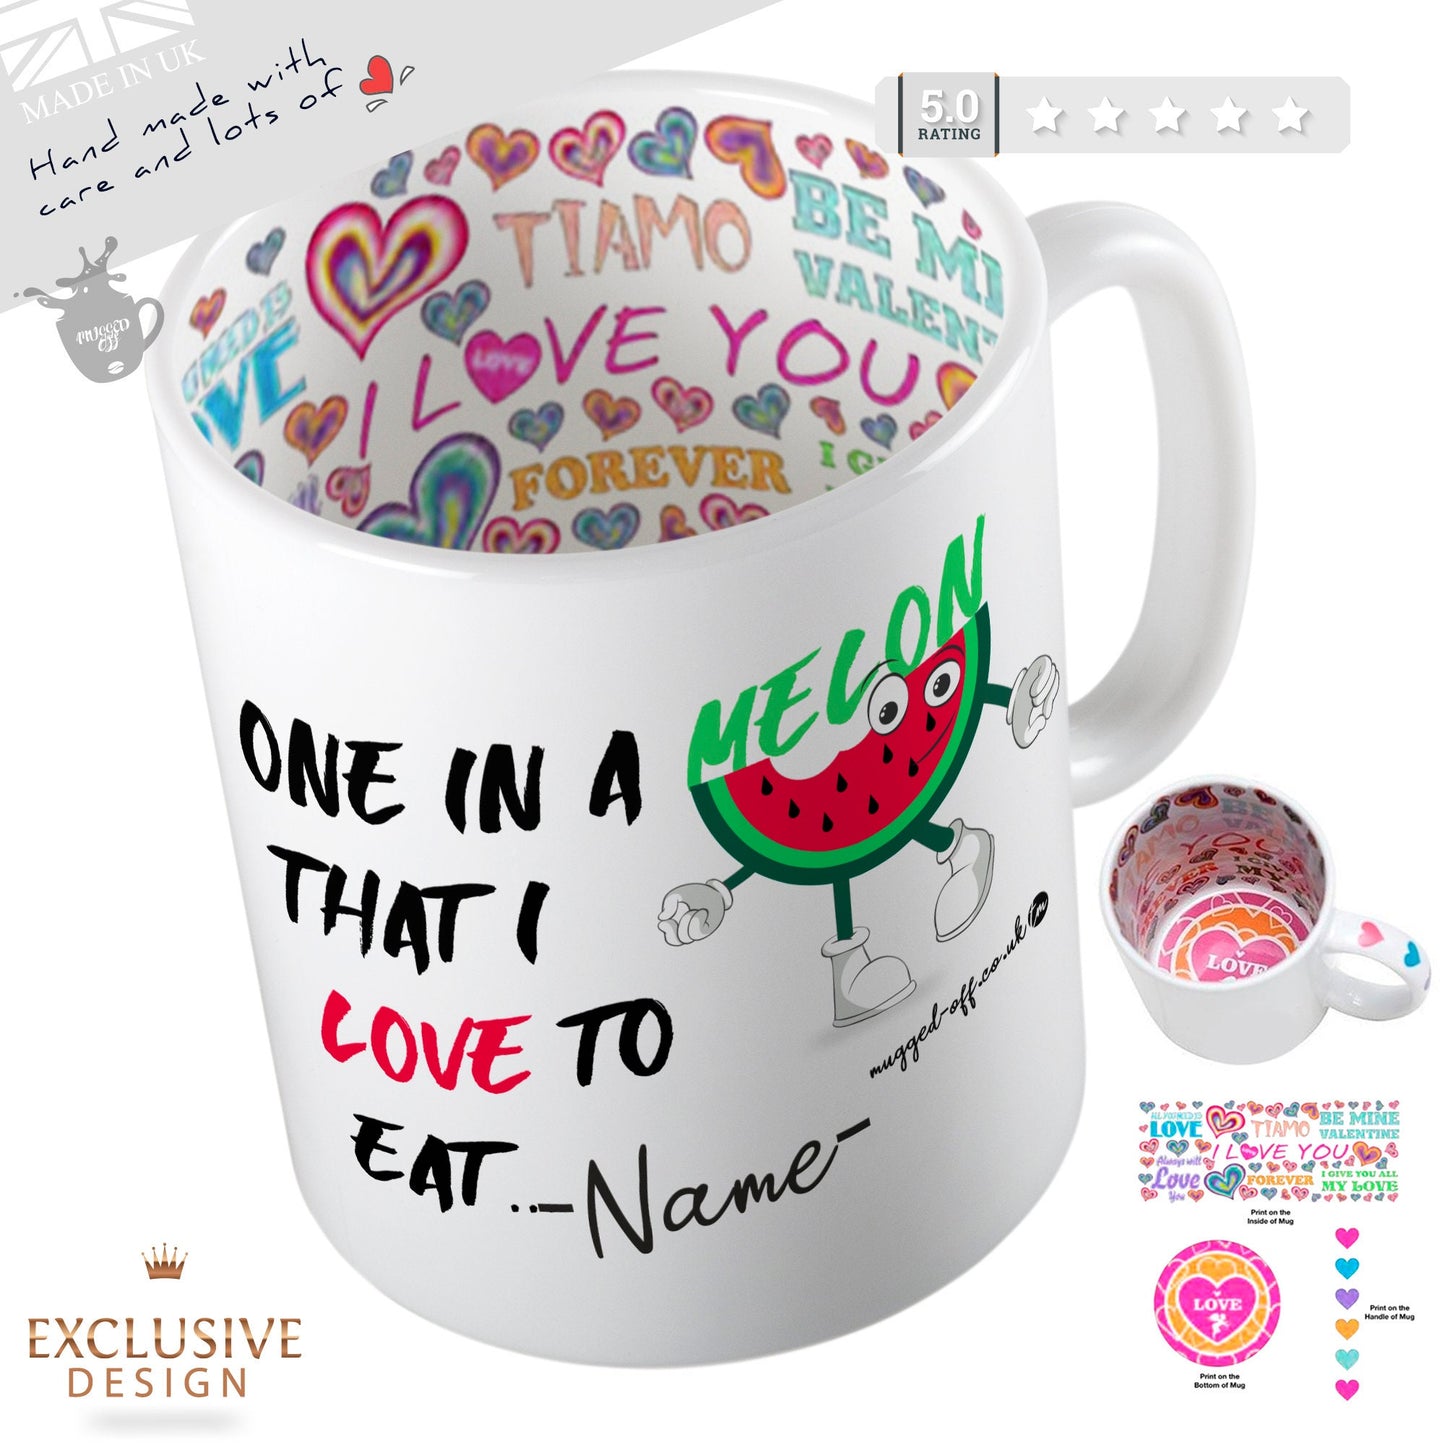 Funny Valentines Day Mug Cups Tea Coffee Mugs one in a melon that I love to eat